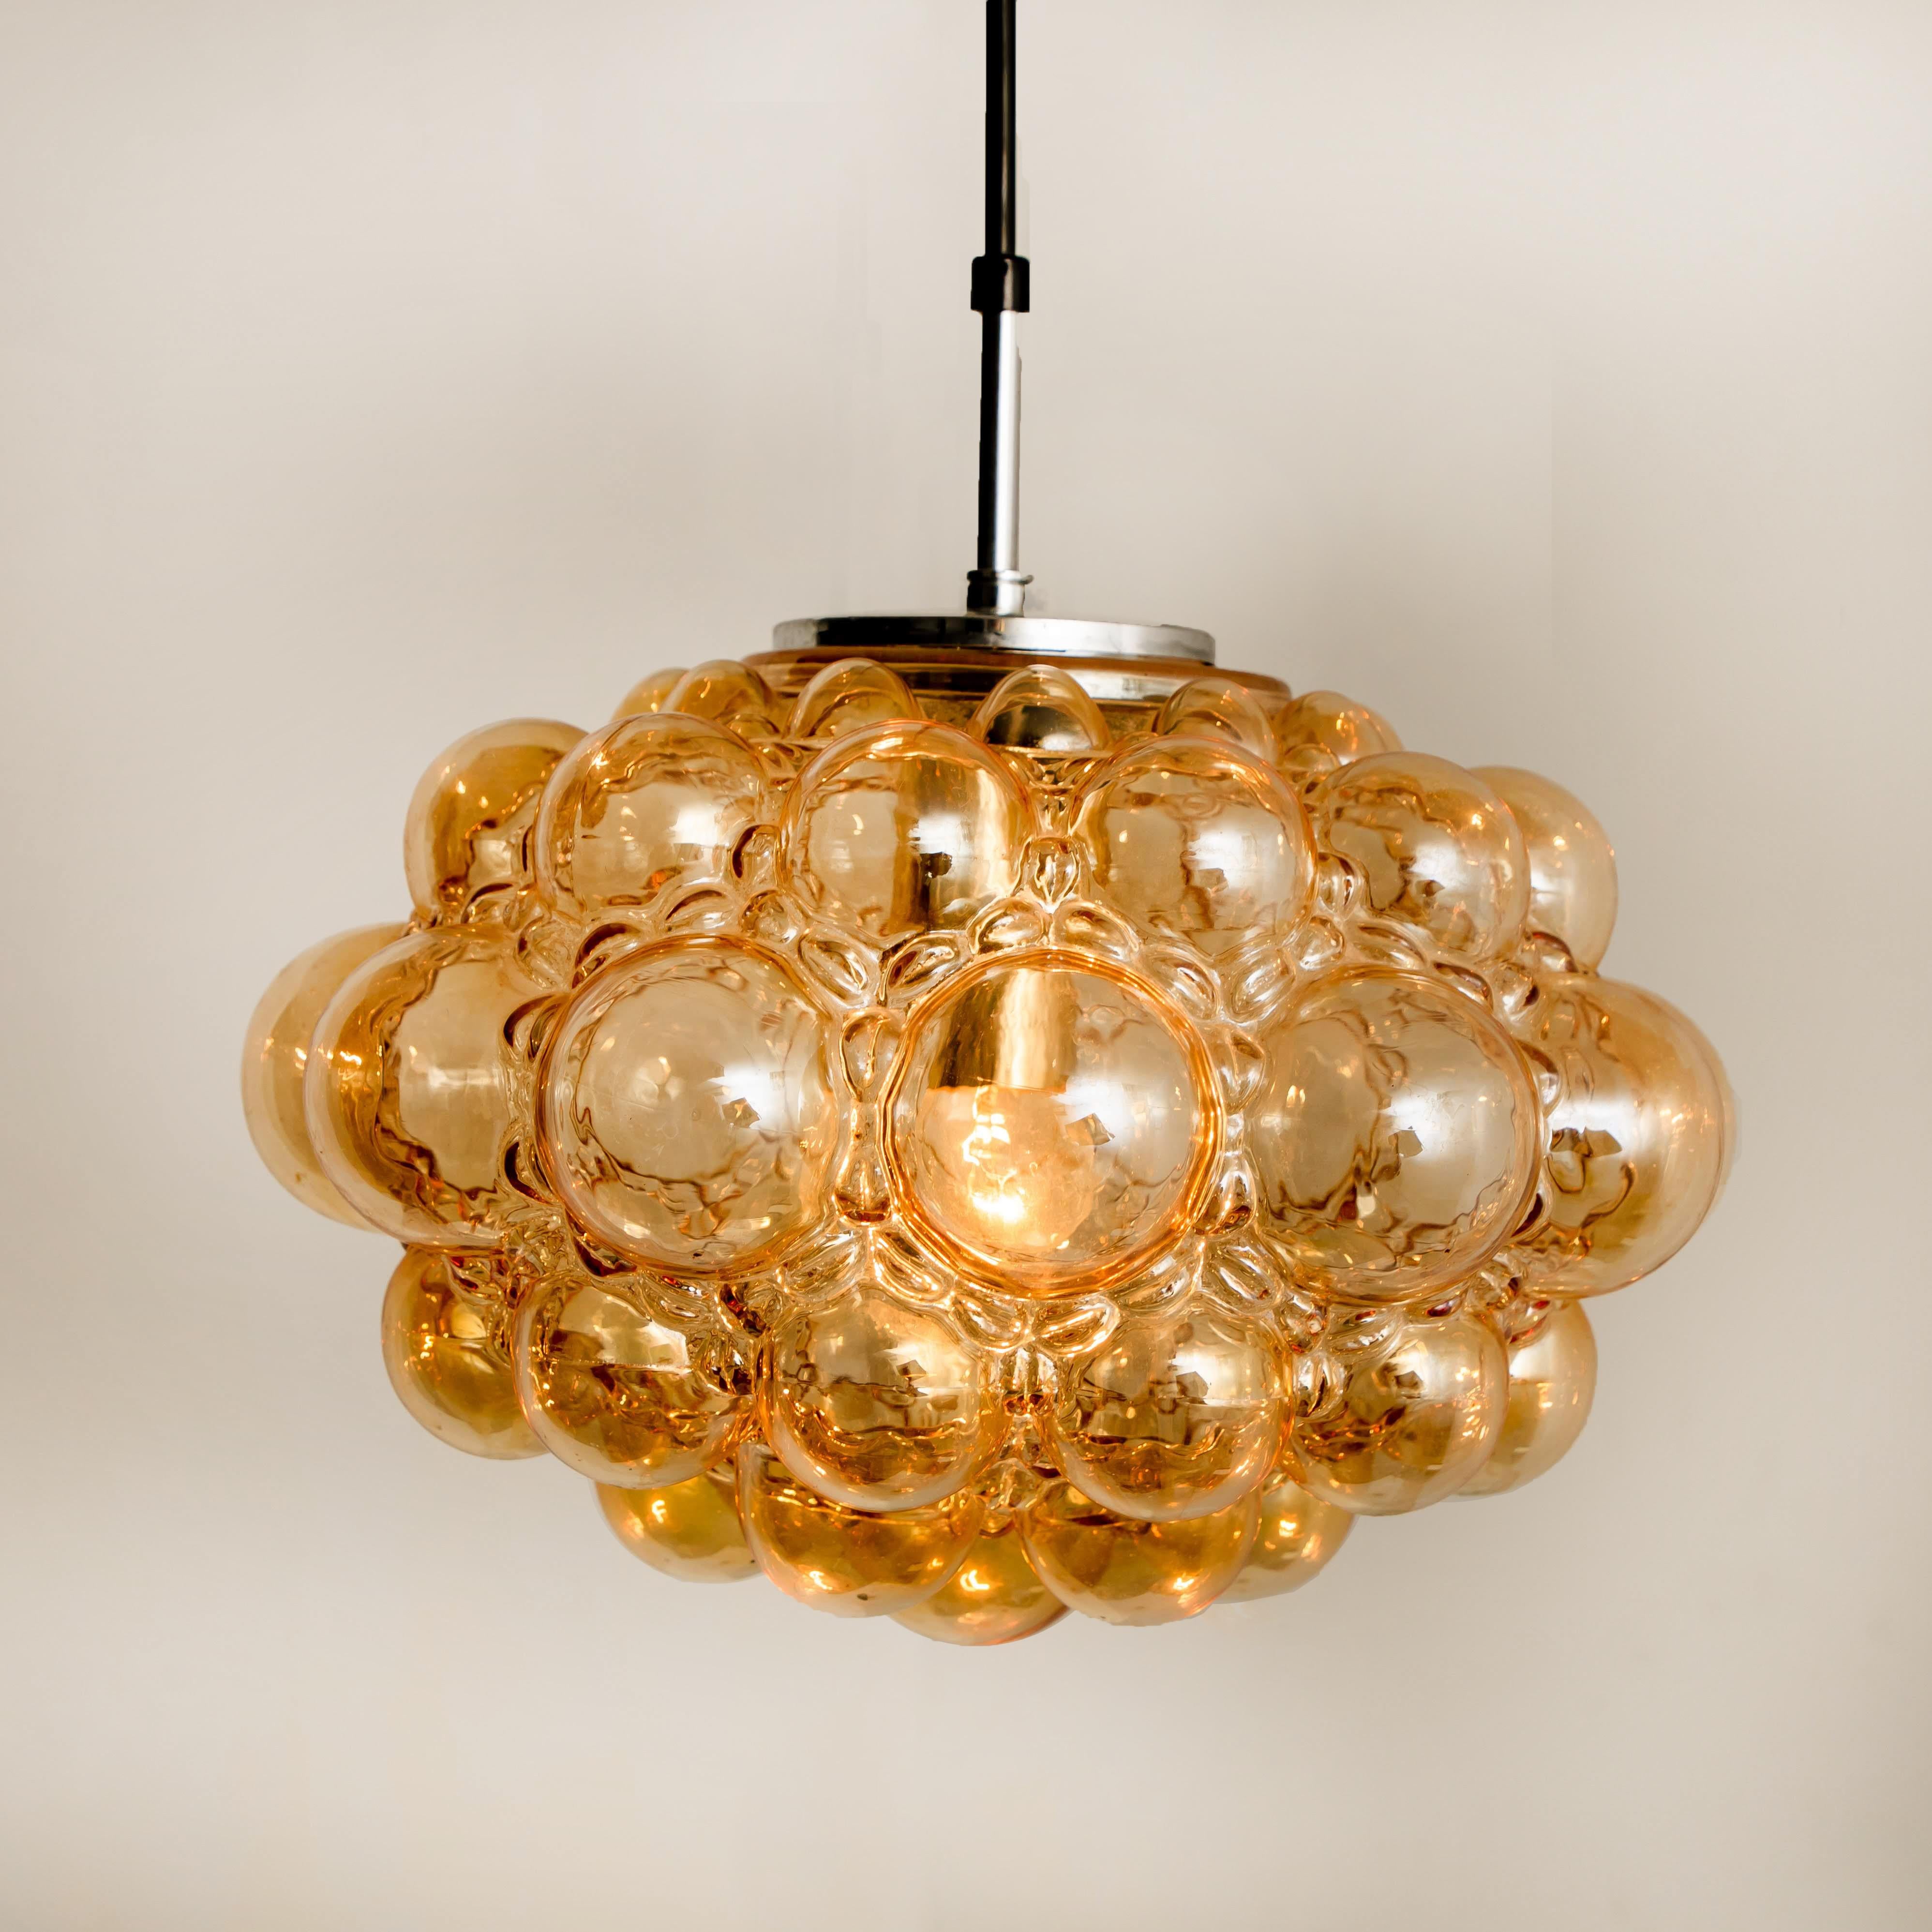 A beautiful bubble glass chandelier or pendant Lights designed by Helena Tynell for Glashütte Limburg. A design classic, the hand blown glass gives a wonderful warm glow.

The dimensions: Height 80 cm from ceiling, the diameter 30 cm. Height of